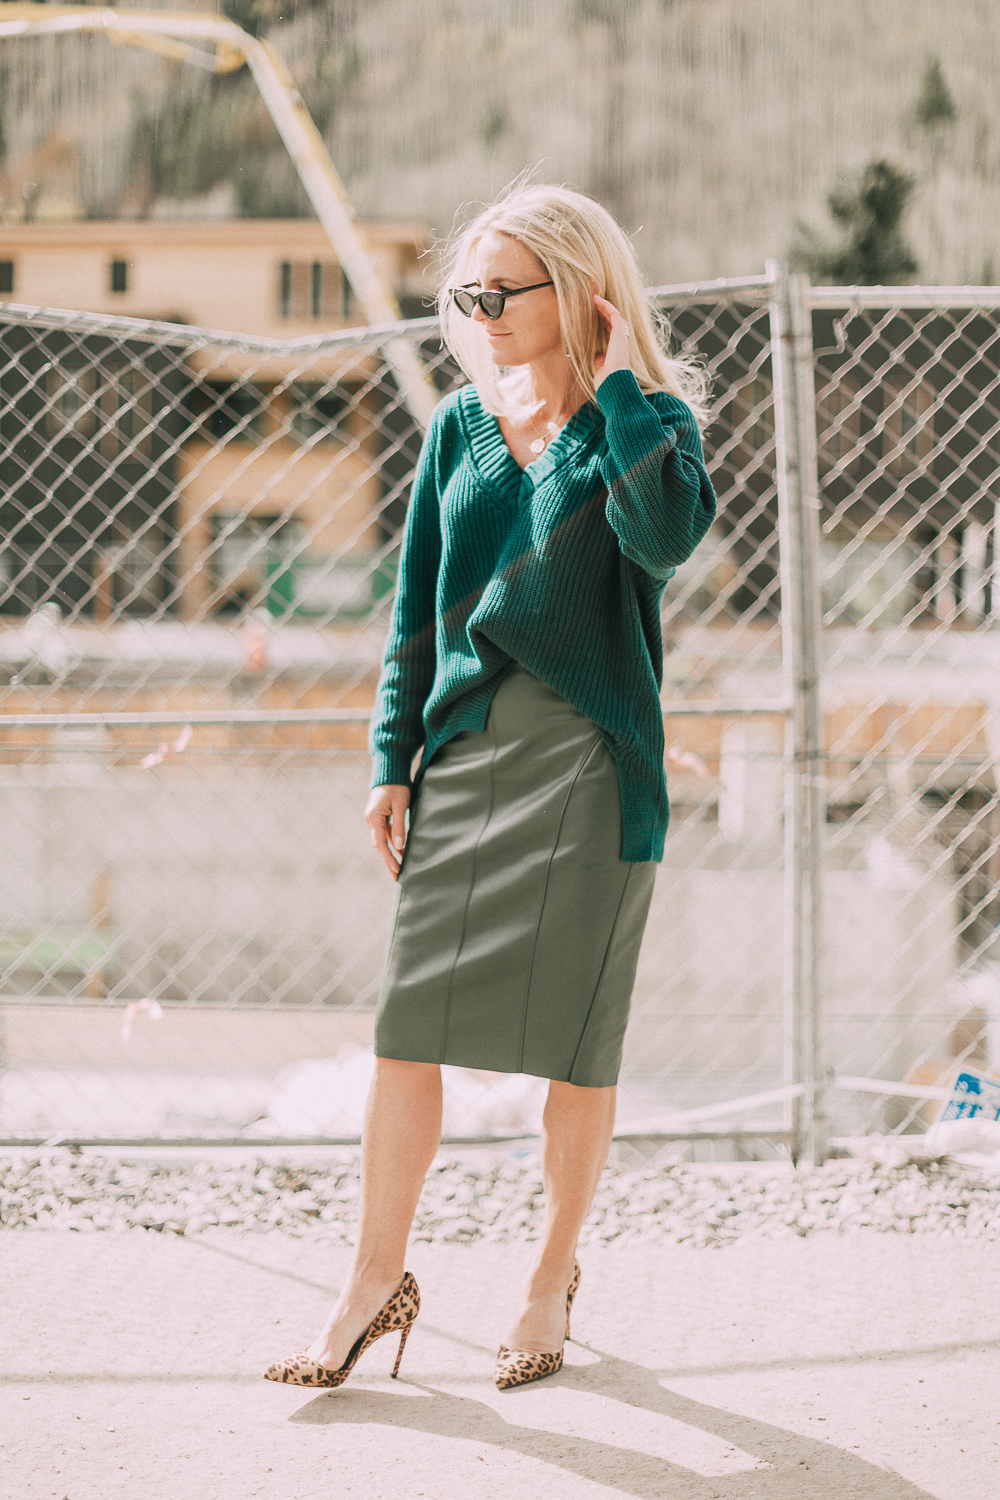 what to wear to work green leather skirt green sweater fall office outfit idea meghan markle inspiration